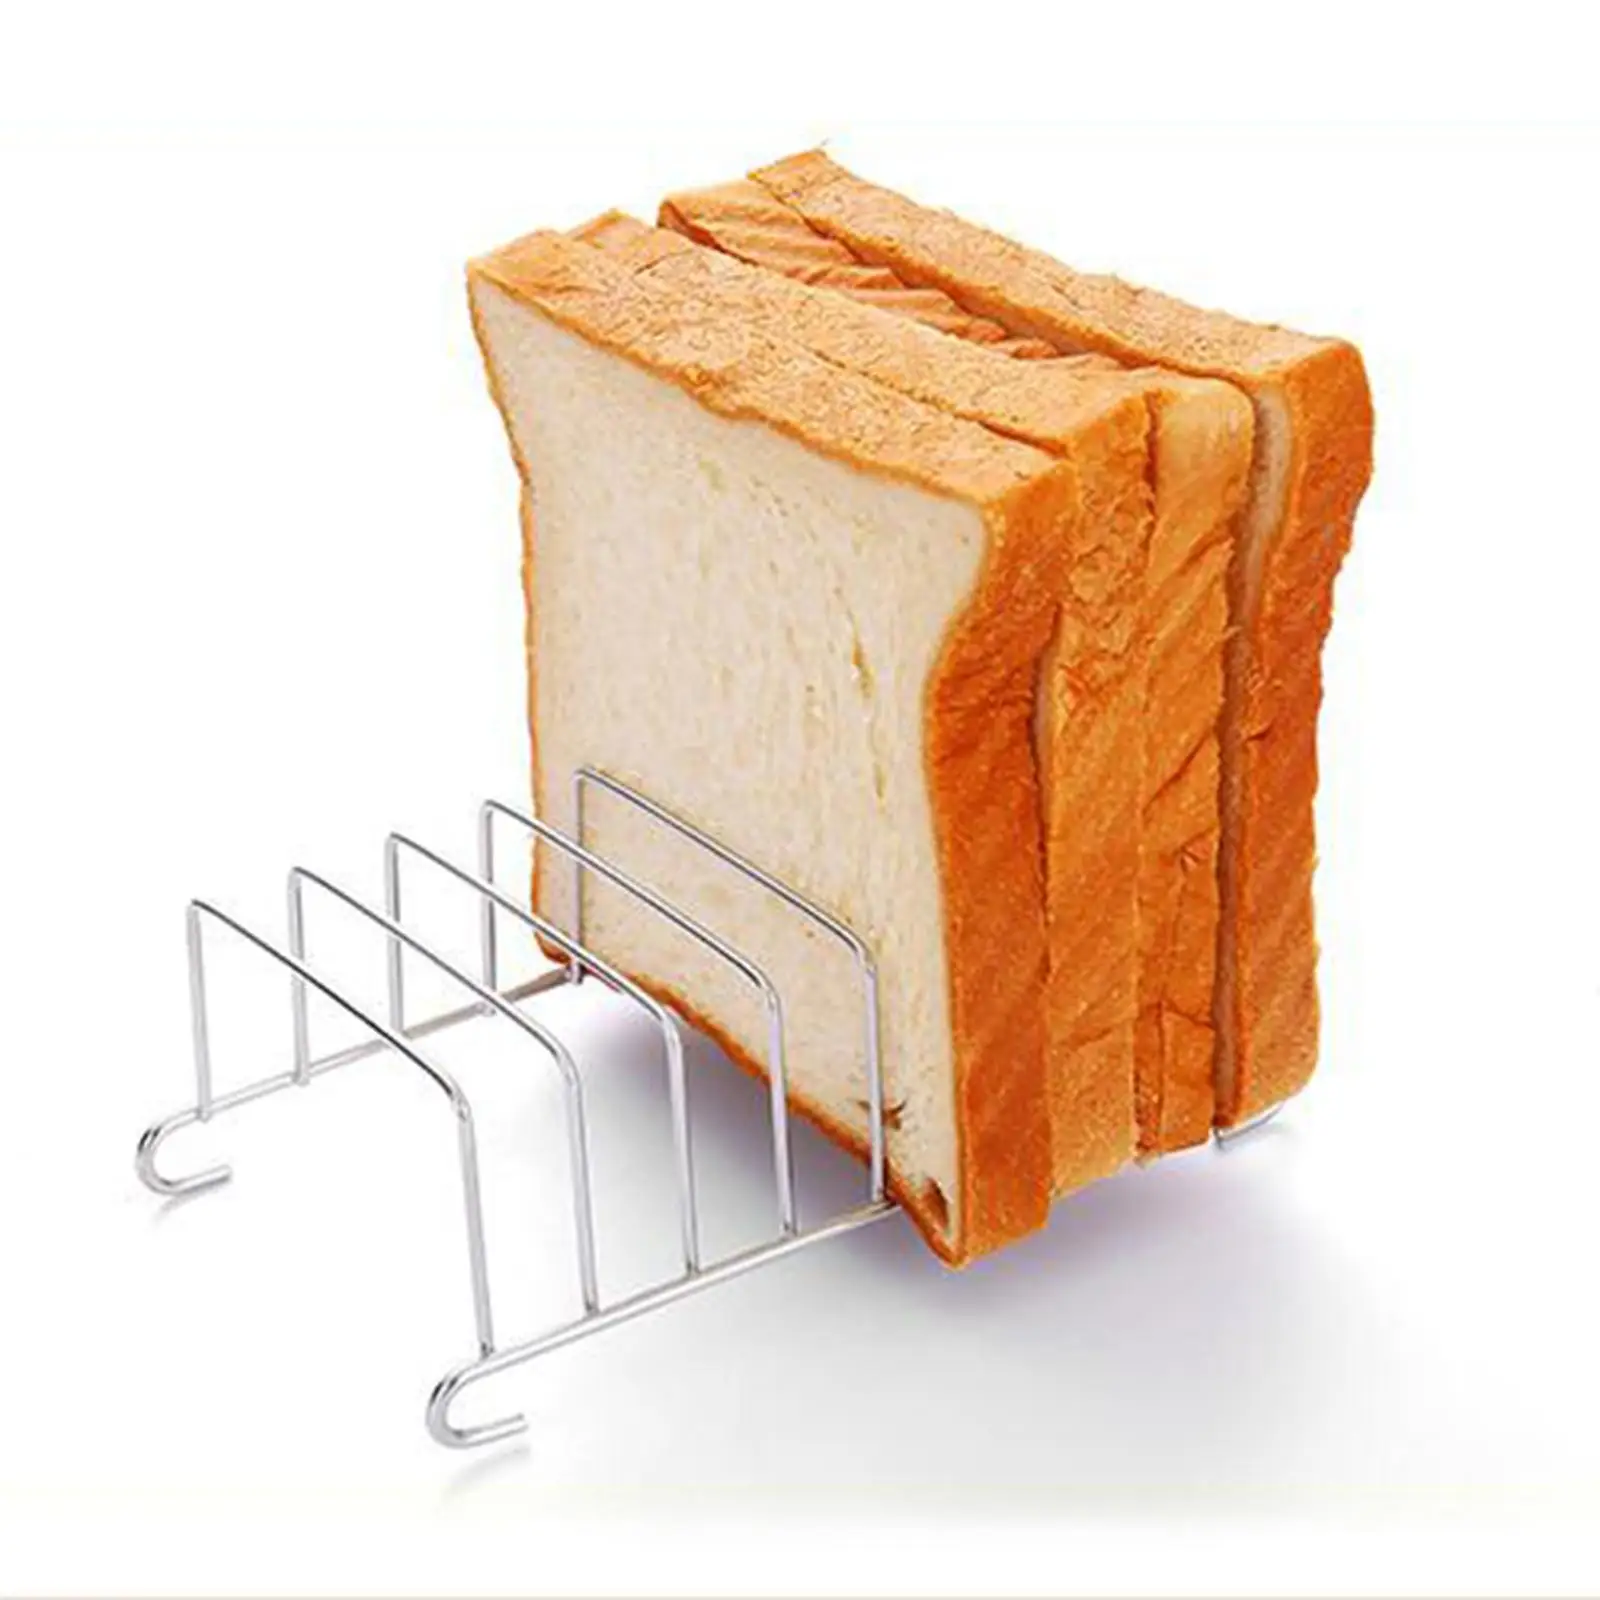 Stainless Food Display Stand Portable Storing Bread Bread Rack Toast Rack Holding for Oven